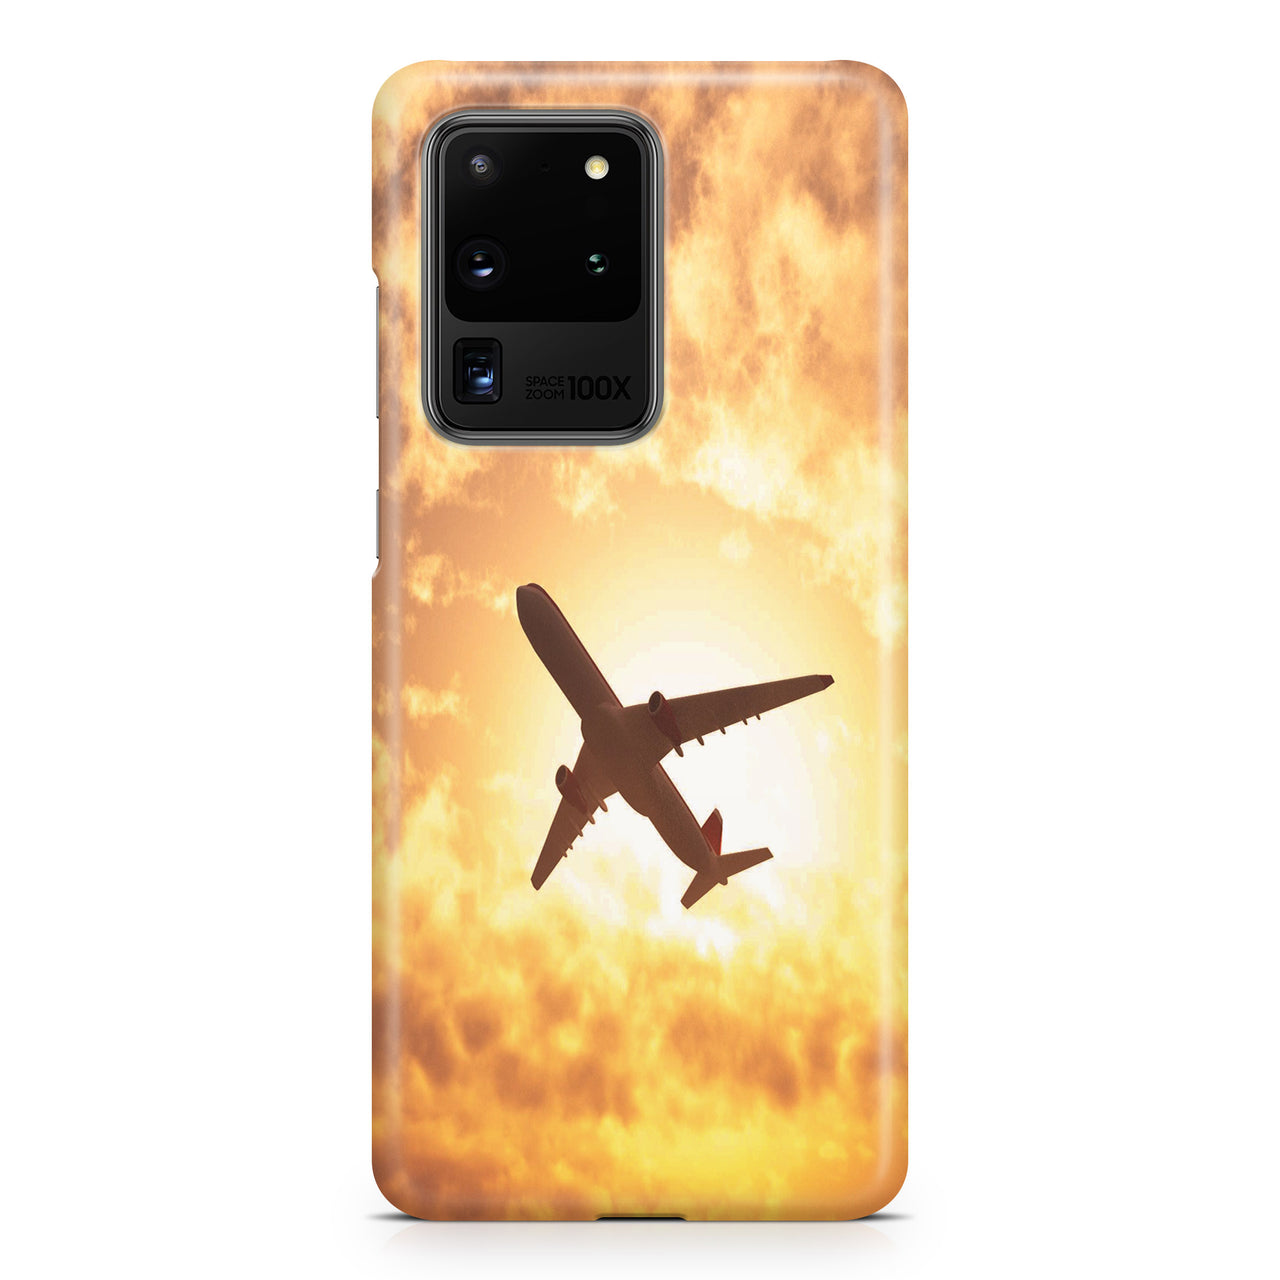 Plane Passing By Samsung A Cases